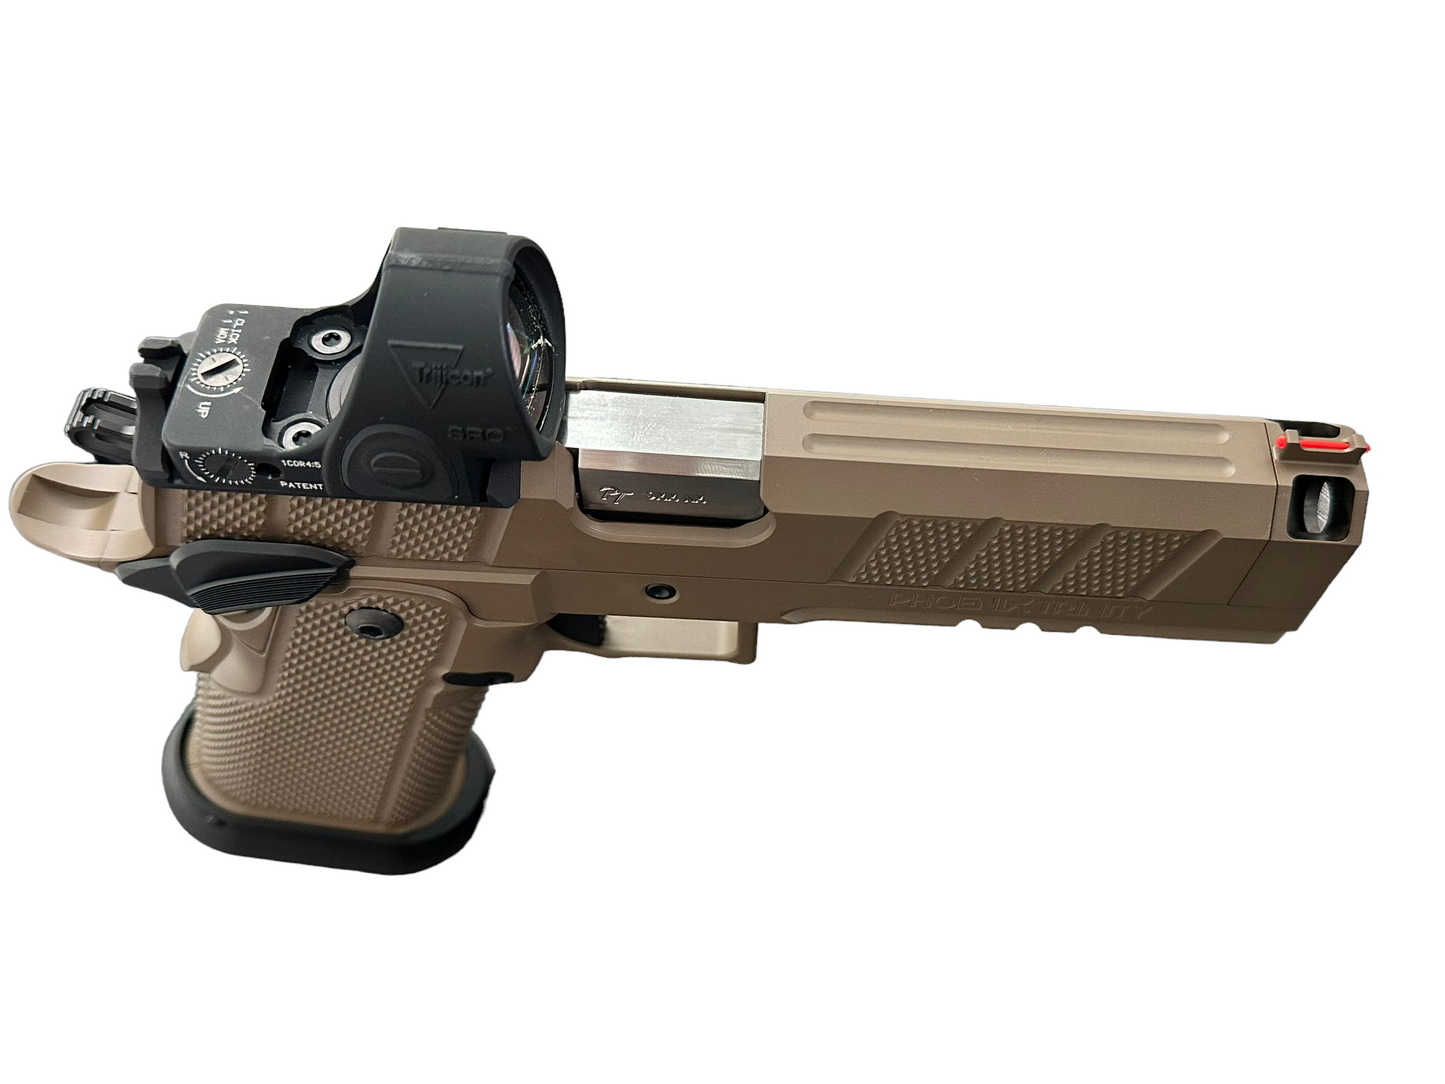 PHOENIX TRINITY H PRO FDE WITH BLACK CONTROLS 9MM COMP’D WITH TRIJICON SRO AND UPGRADES